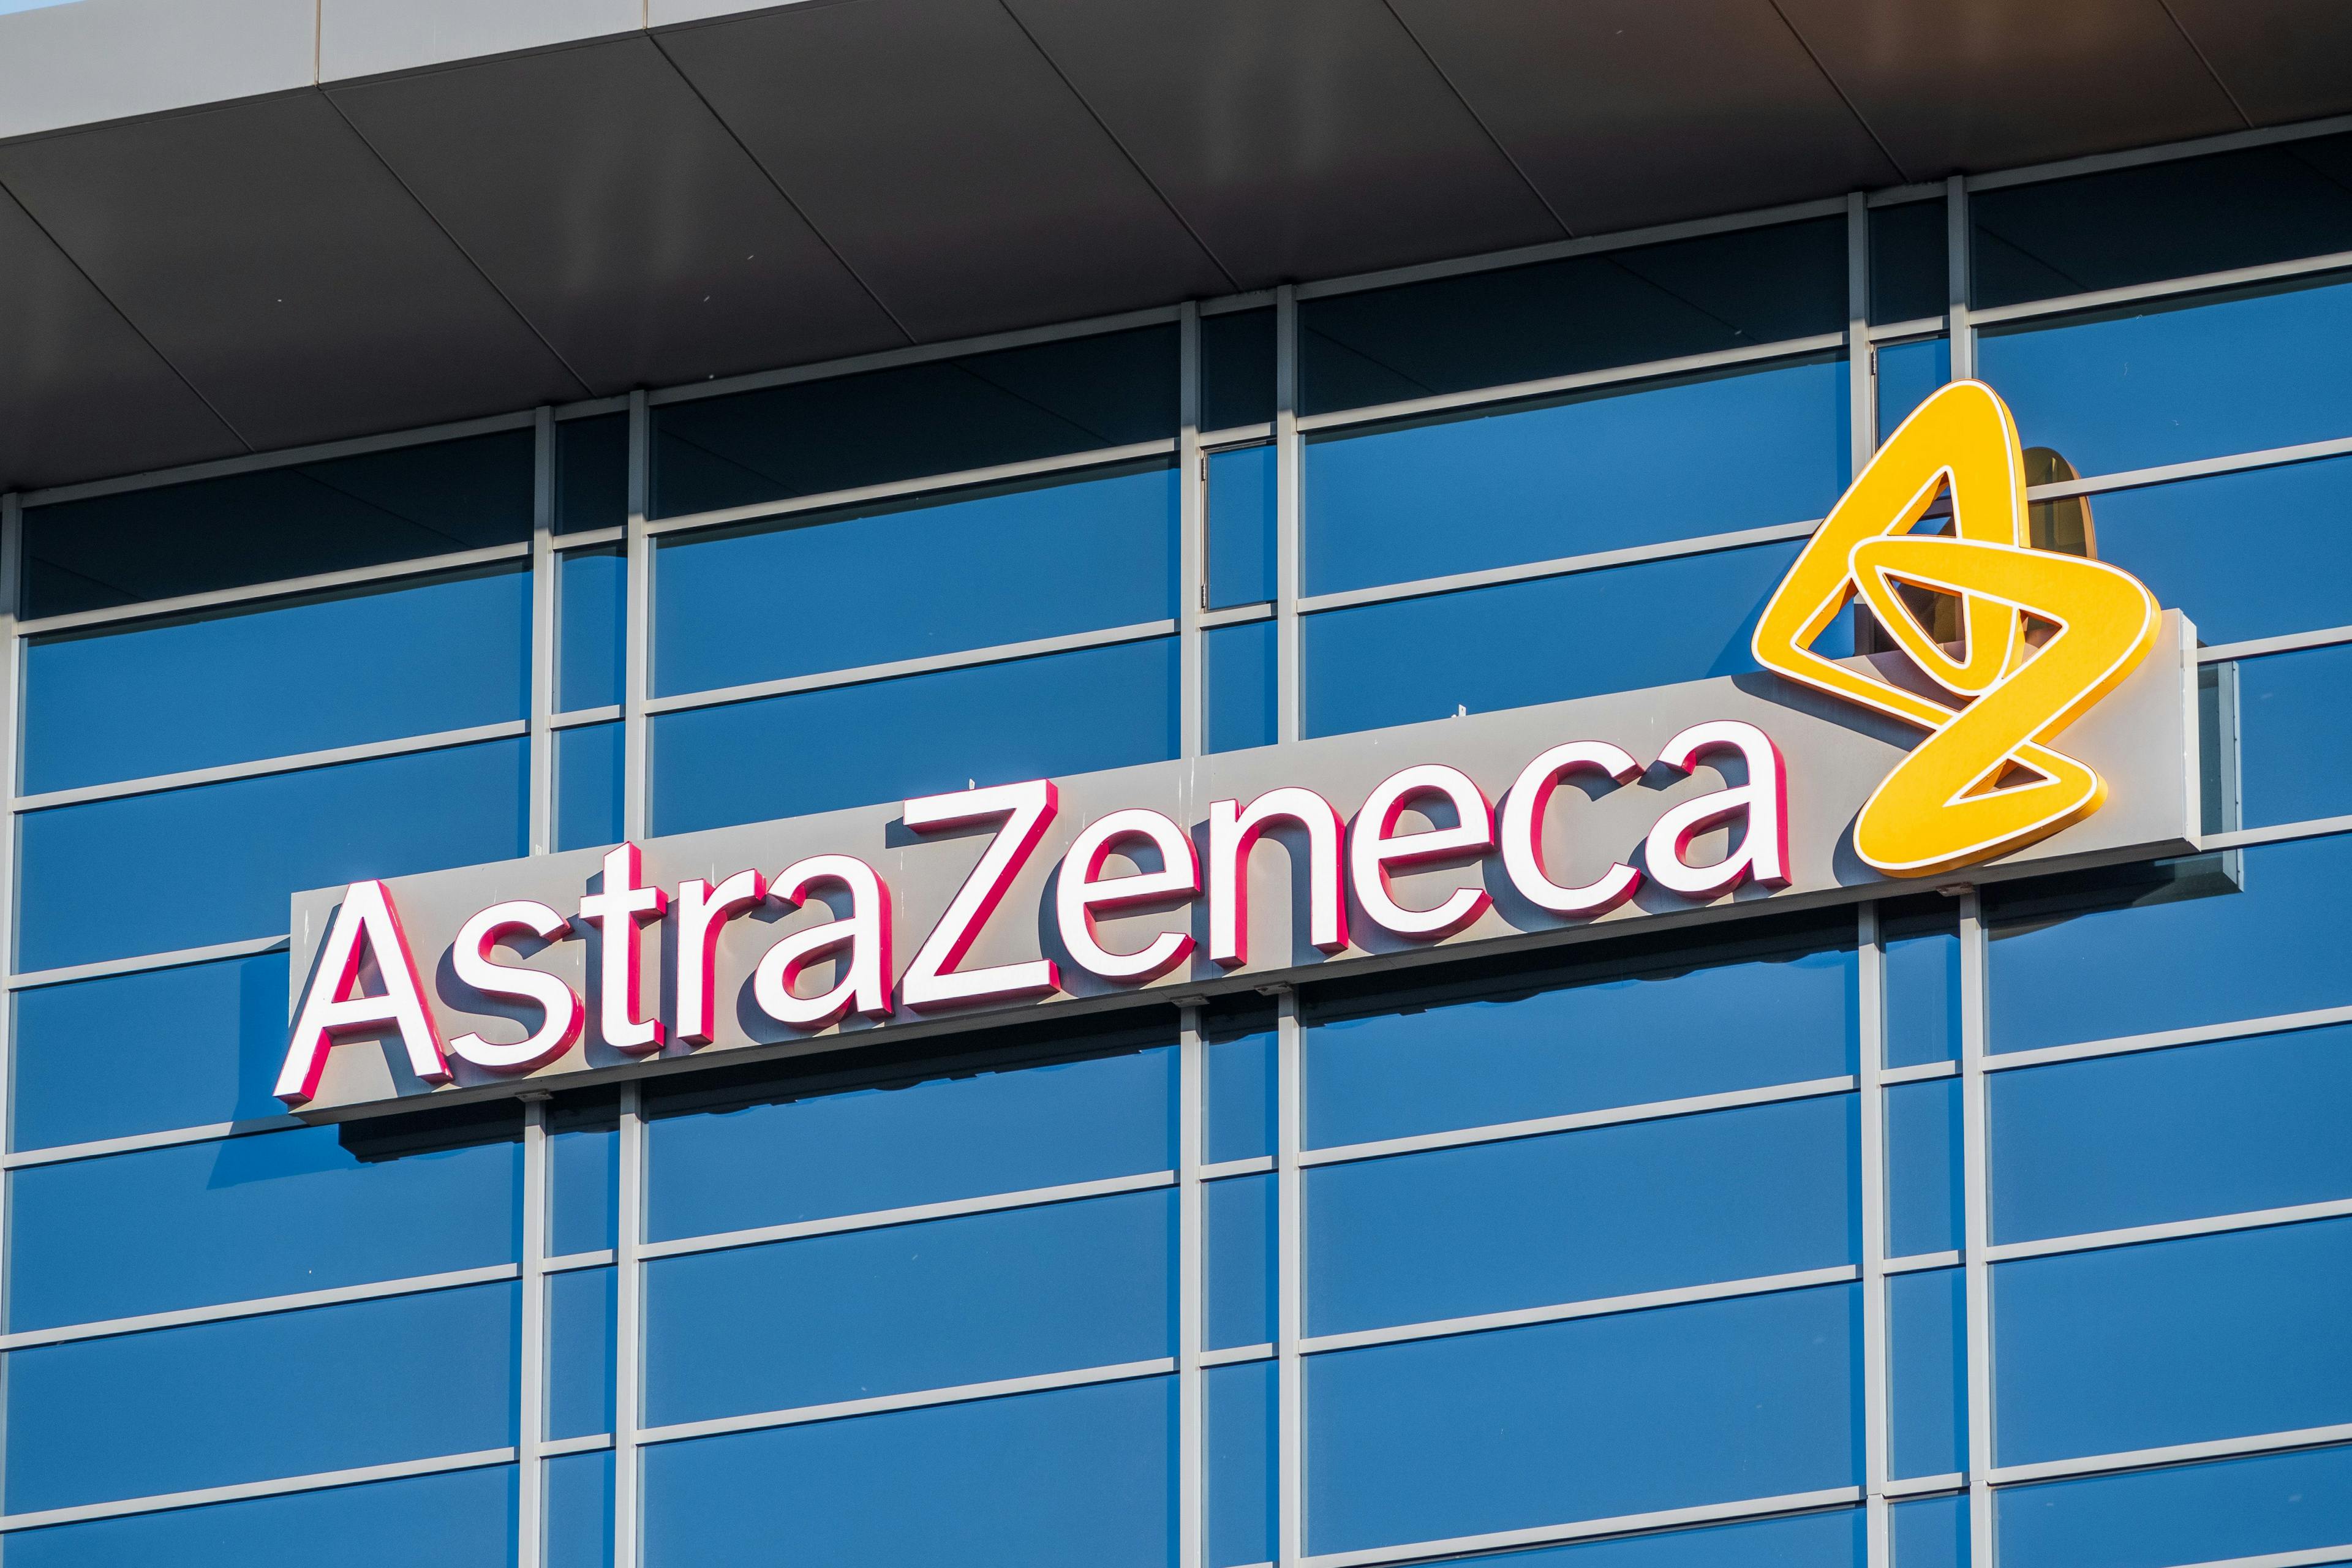 AstraZeneca Caps Out-of-Pocket Inhaler Costs at $35 Per Month